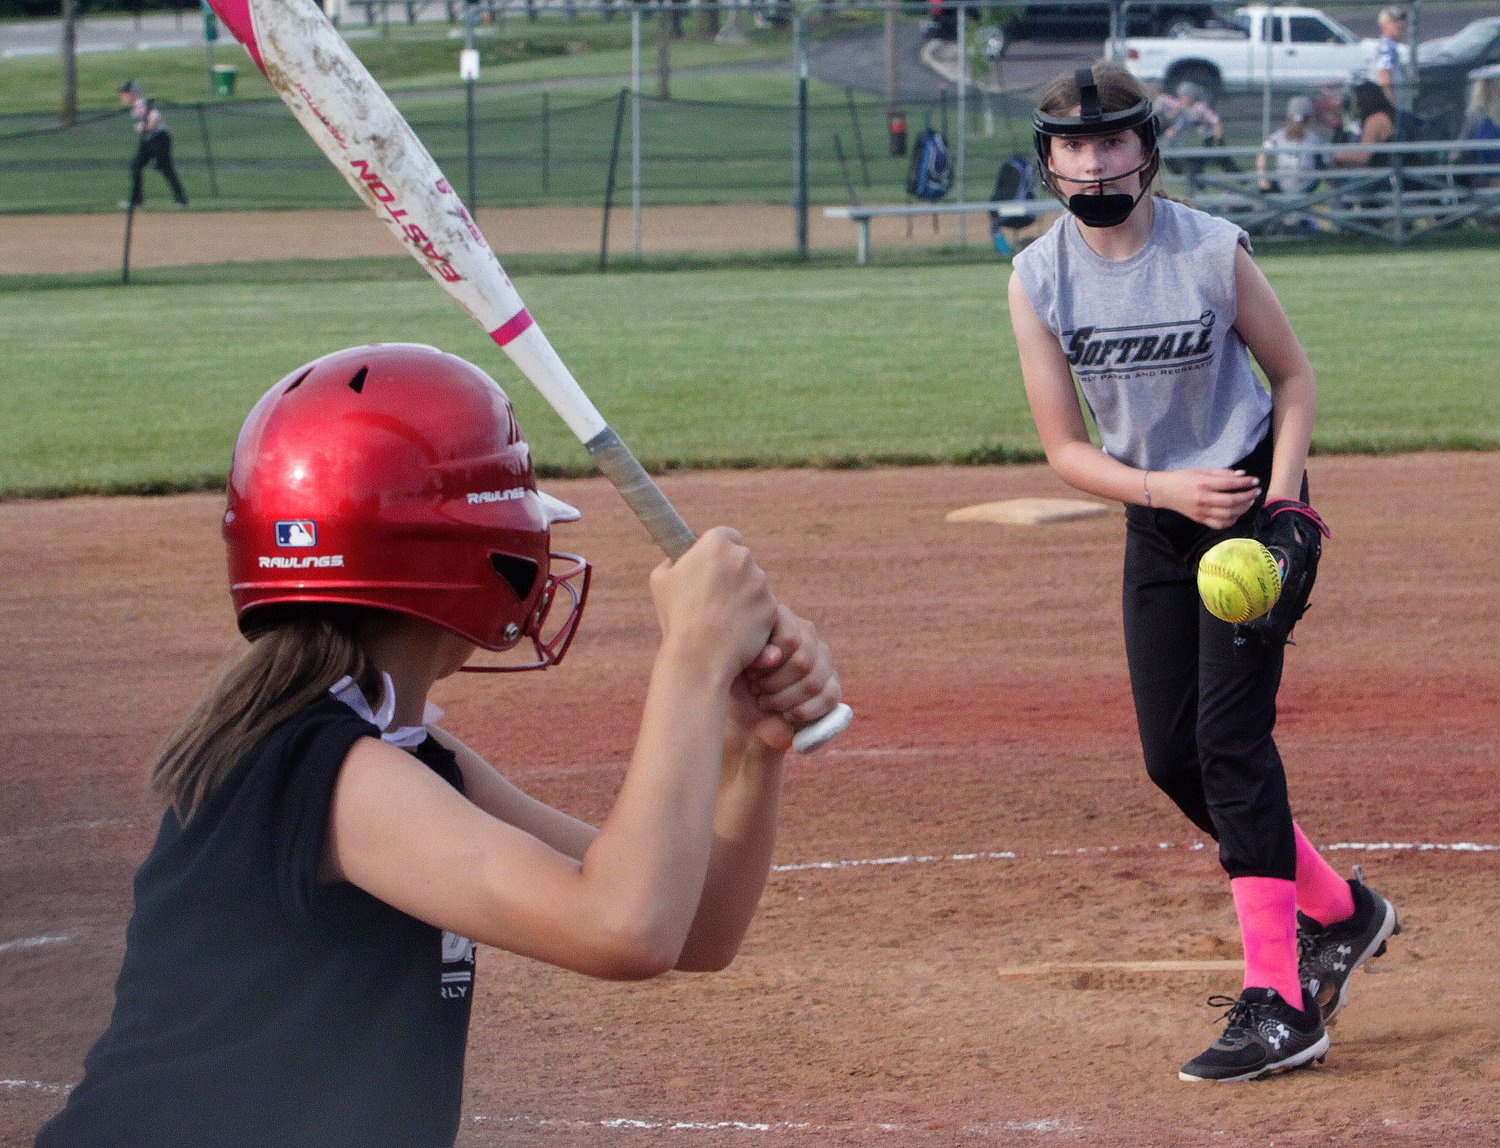 Maylee Rosenfelder of Centralia girls age 10U softball team delivers a pitch Monday, June 7, during a Moberly Parks and Recreation Department summer rec league game played at the Howard Hils Athletic Complex. Final game scores and team records are not kept in this rec league.